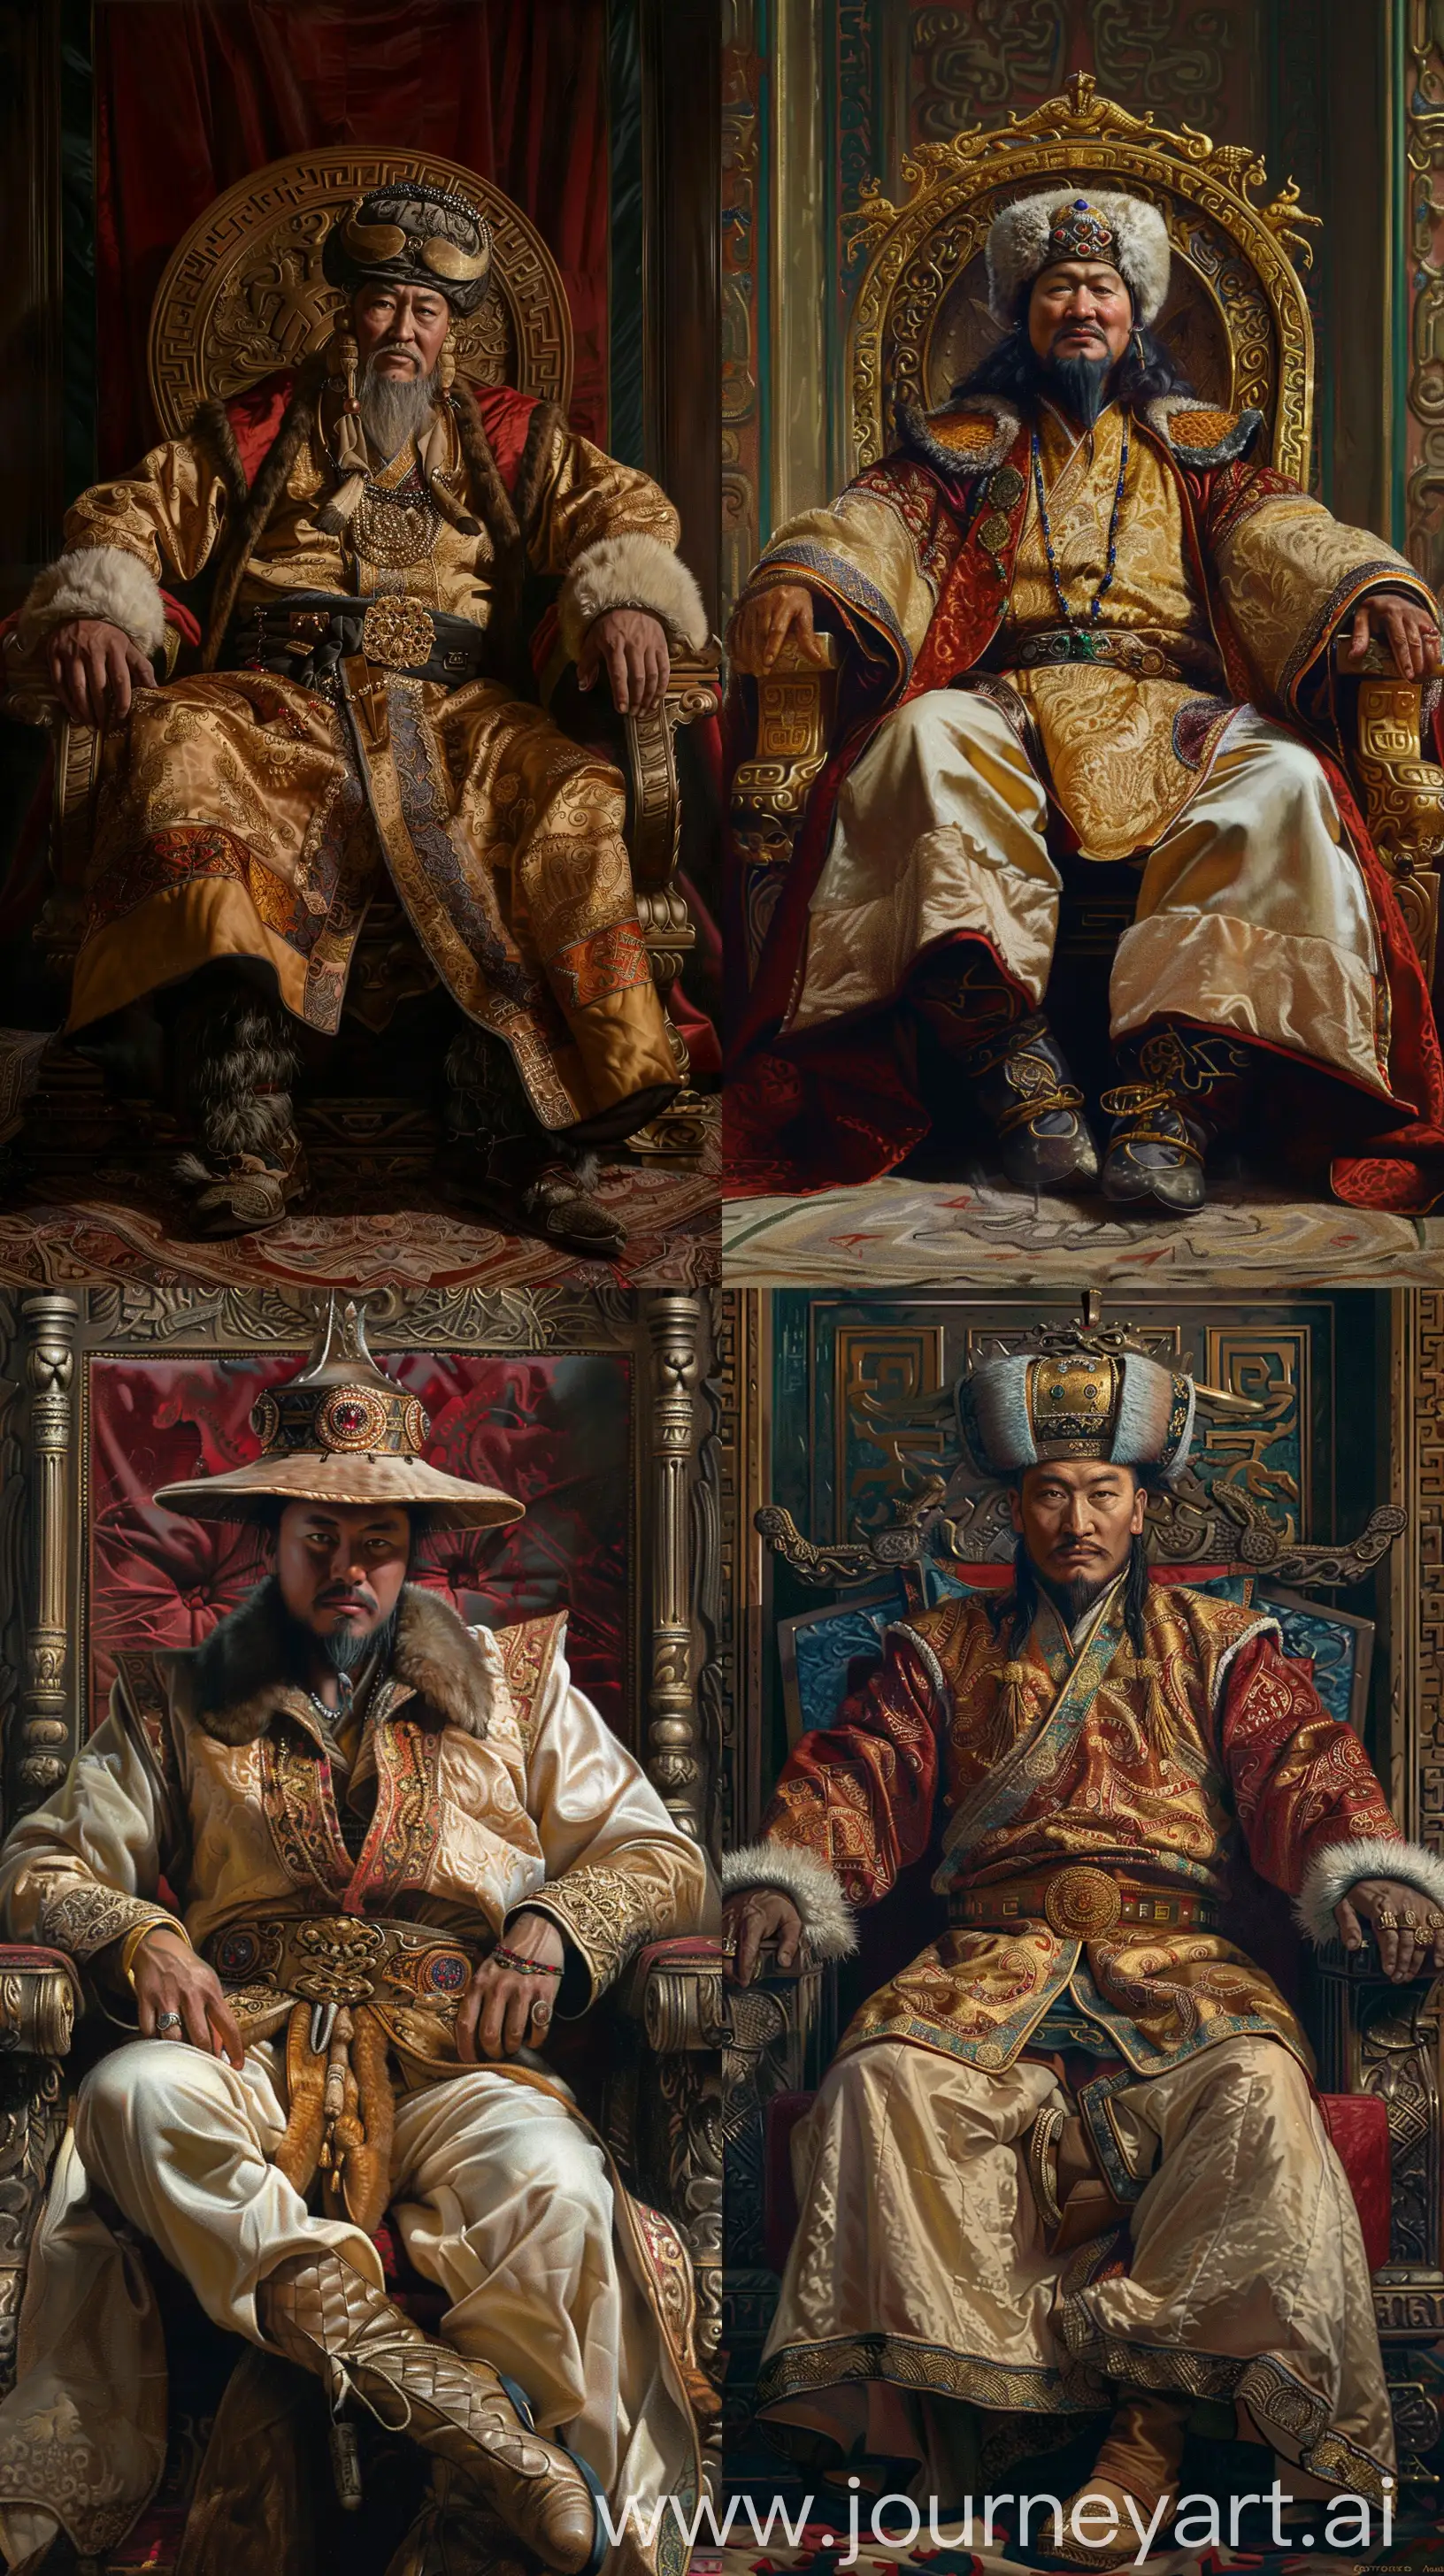 Genghis-Khan-Majestic-Portrait-in-Traditional-Silk-Robe-and-Renaissance-Style